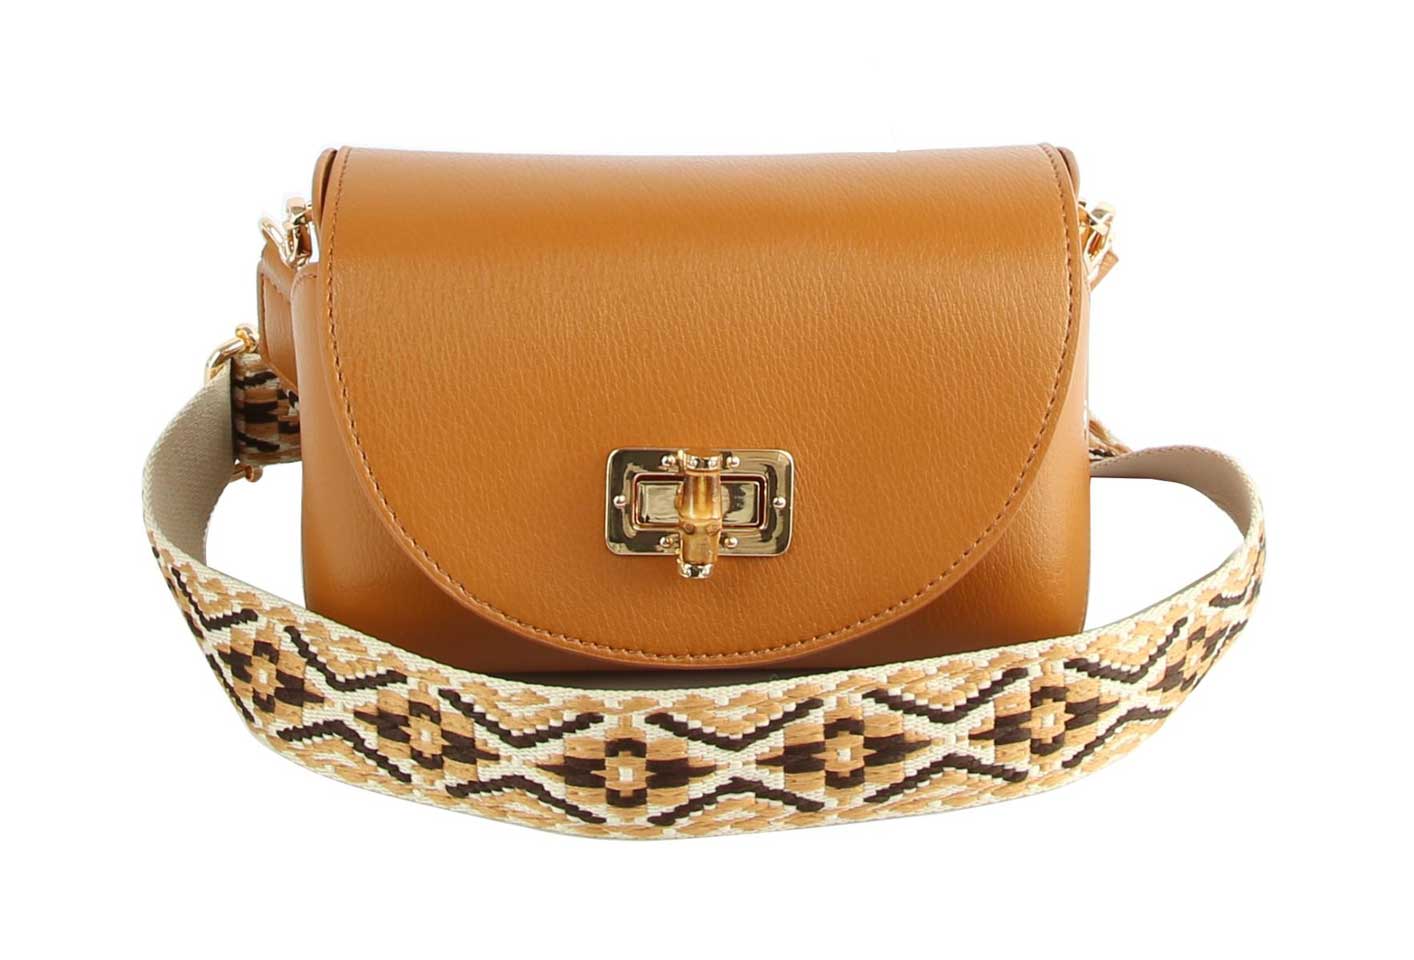 Brown PU Leather Guitar Strap Bamboo Twist Lock Flap Crossbody Bag, This gorgeous crossbody bag is going to be your absolute favorite new purchase! It features with adjustable and detachable handle strap, upper Flap with pocket. Ideal for keeping your money, bank cards, lipstick, coins, and other small essentials in one place. It's versatile enough to carry with different outfits throughout the week. It's perfectly lightweight to carry around all day with all handy items altogether.